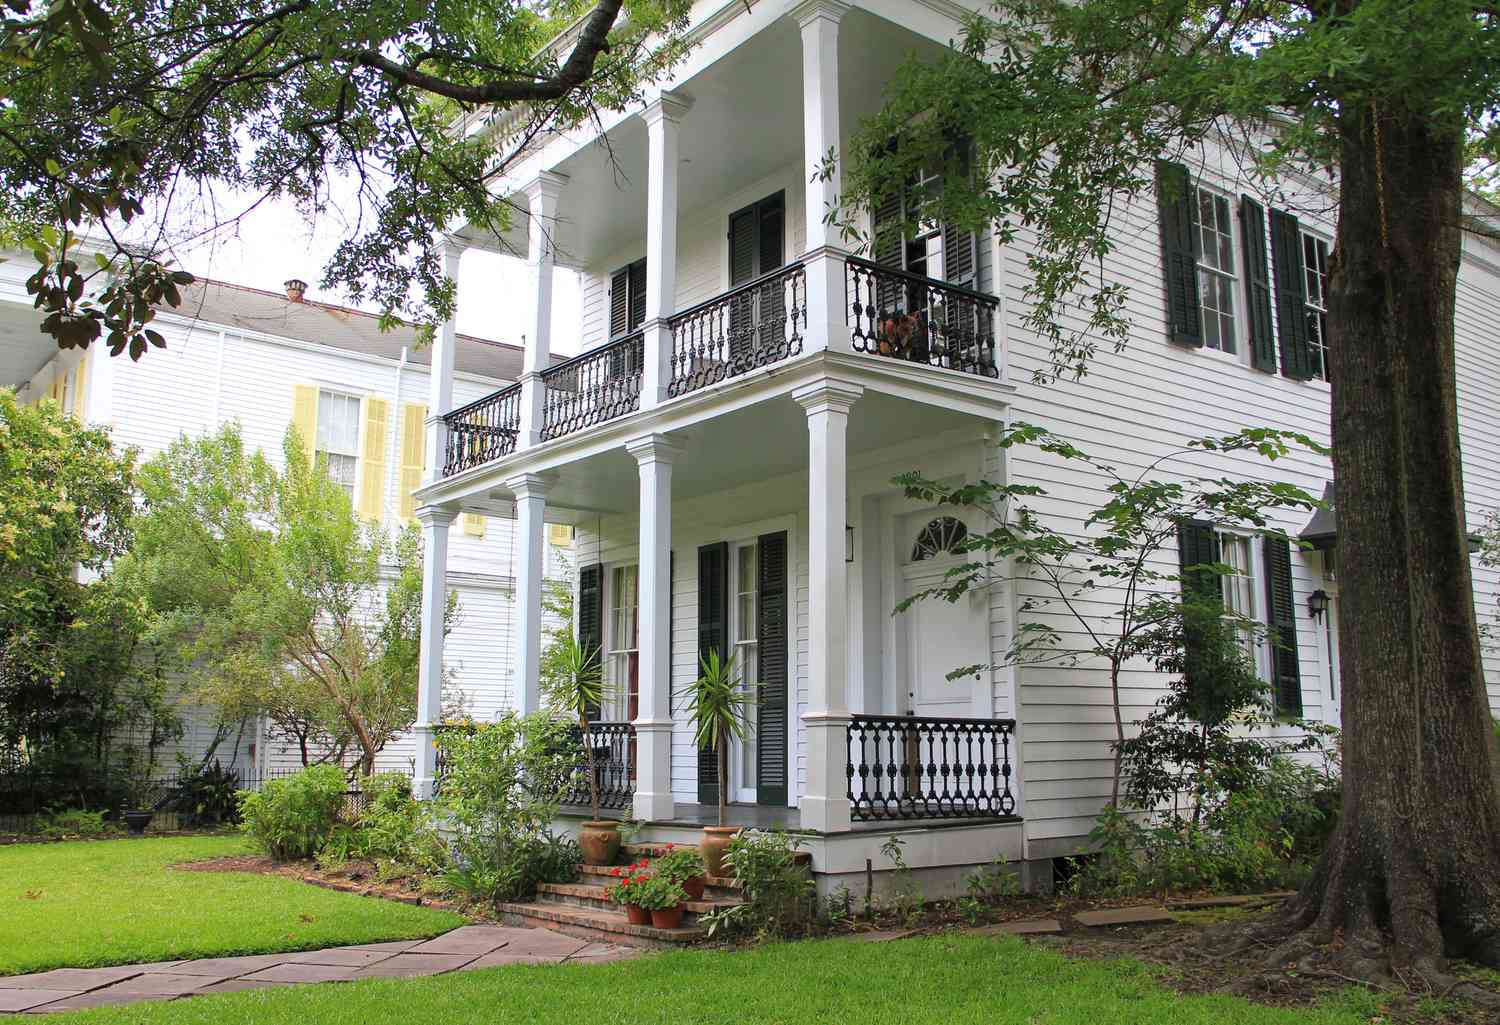 A double gallery house in the Garden District of New Orleans.